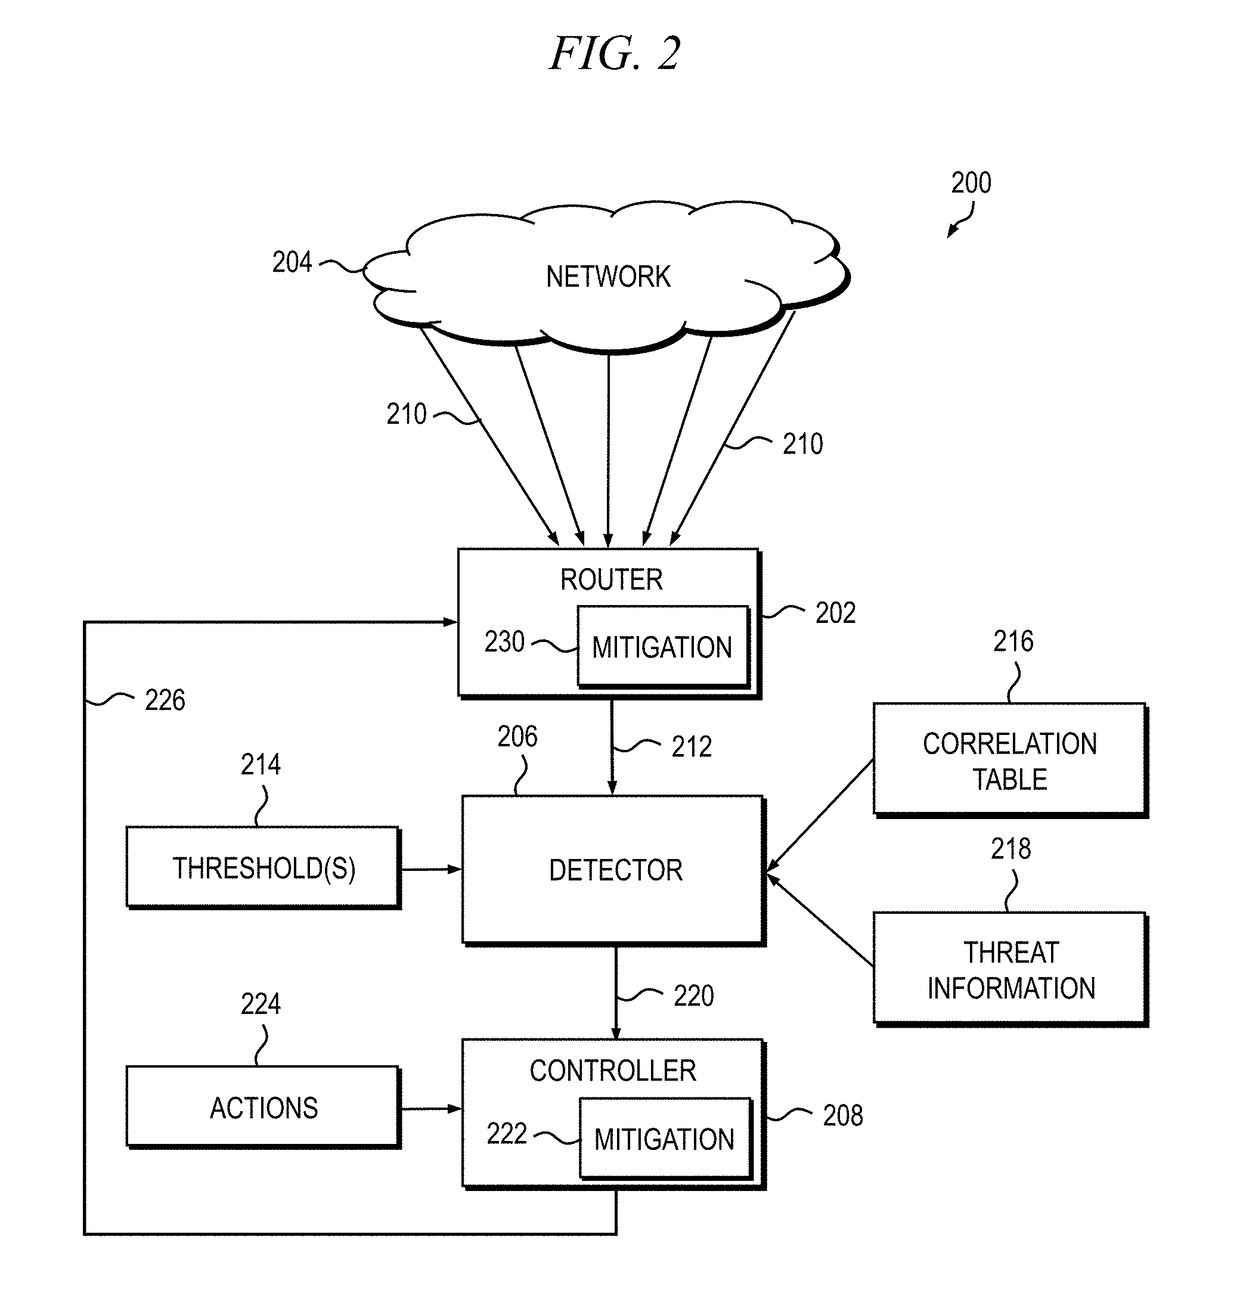 Distributed denial-of-service attack detection and mitigation based on autonomous system number